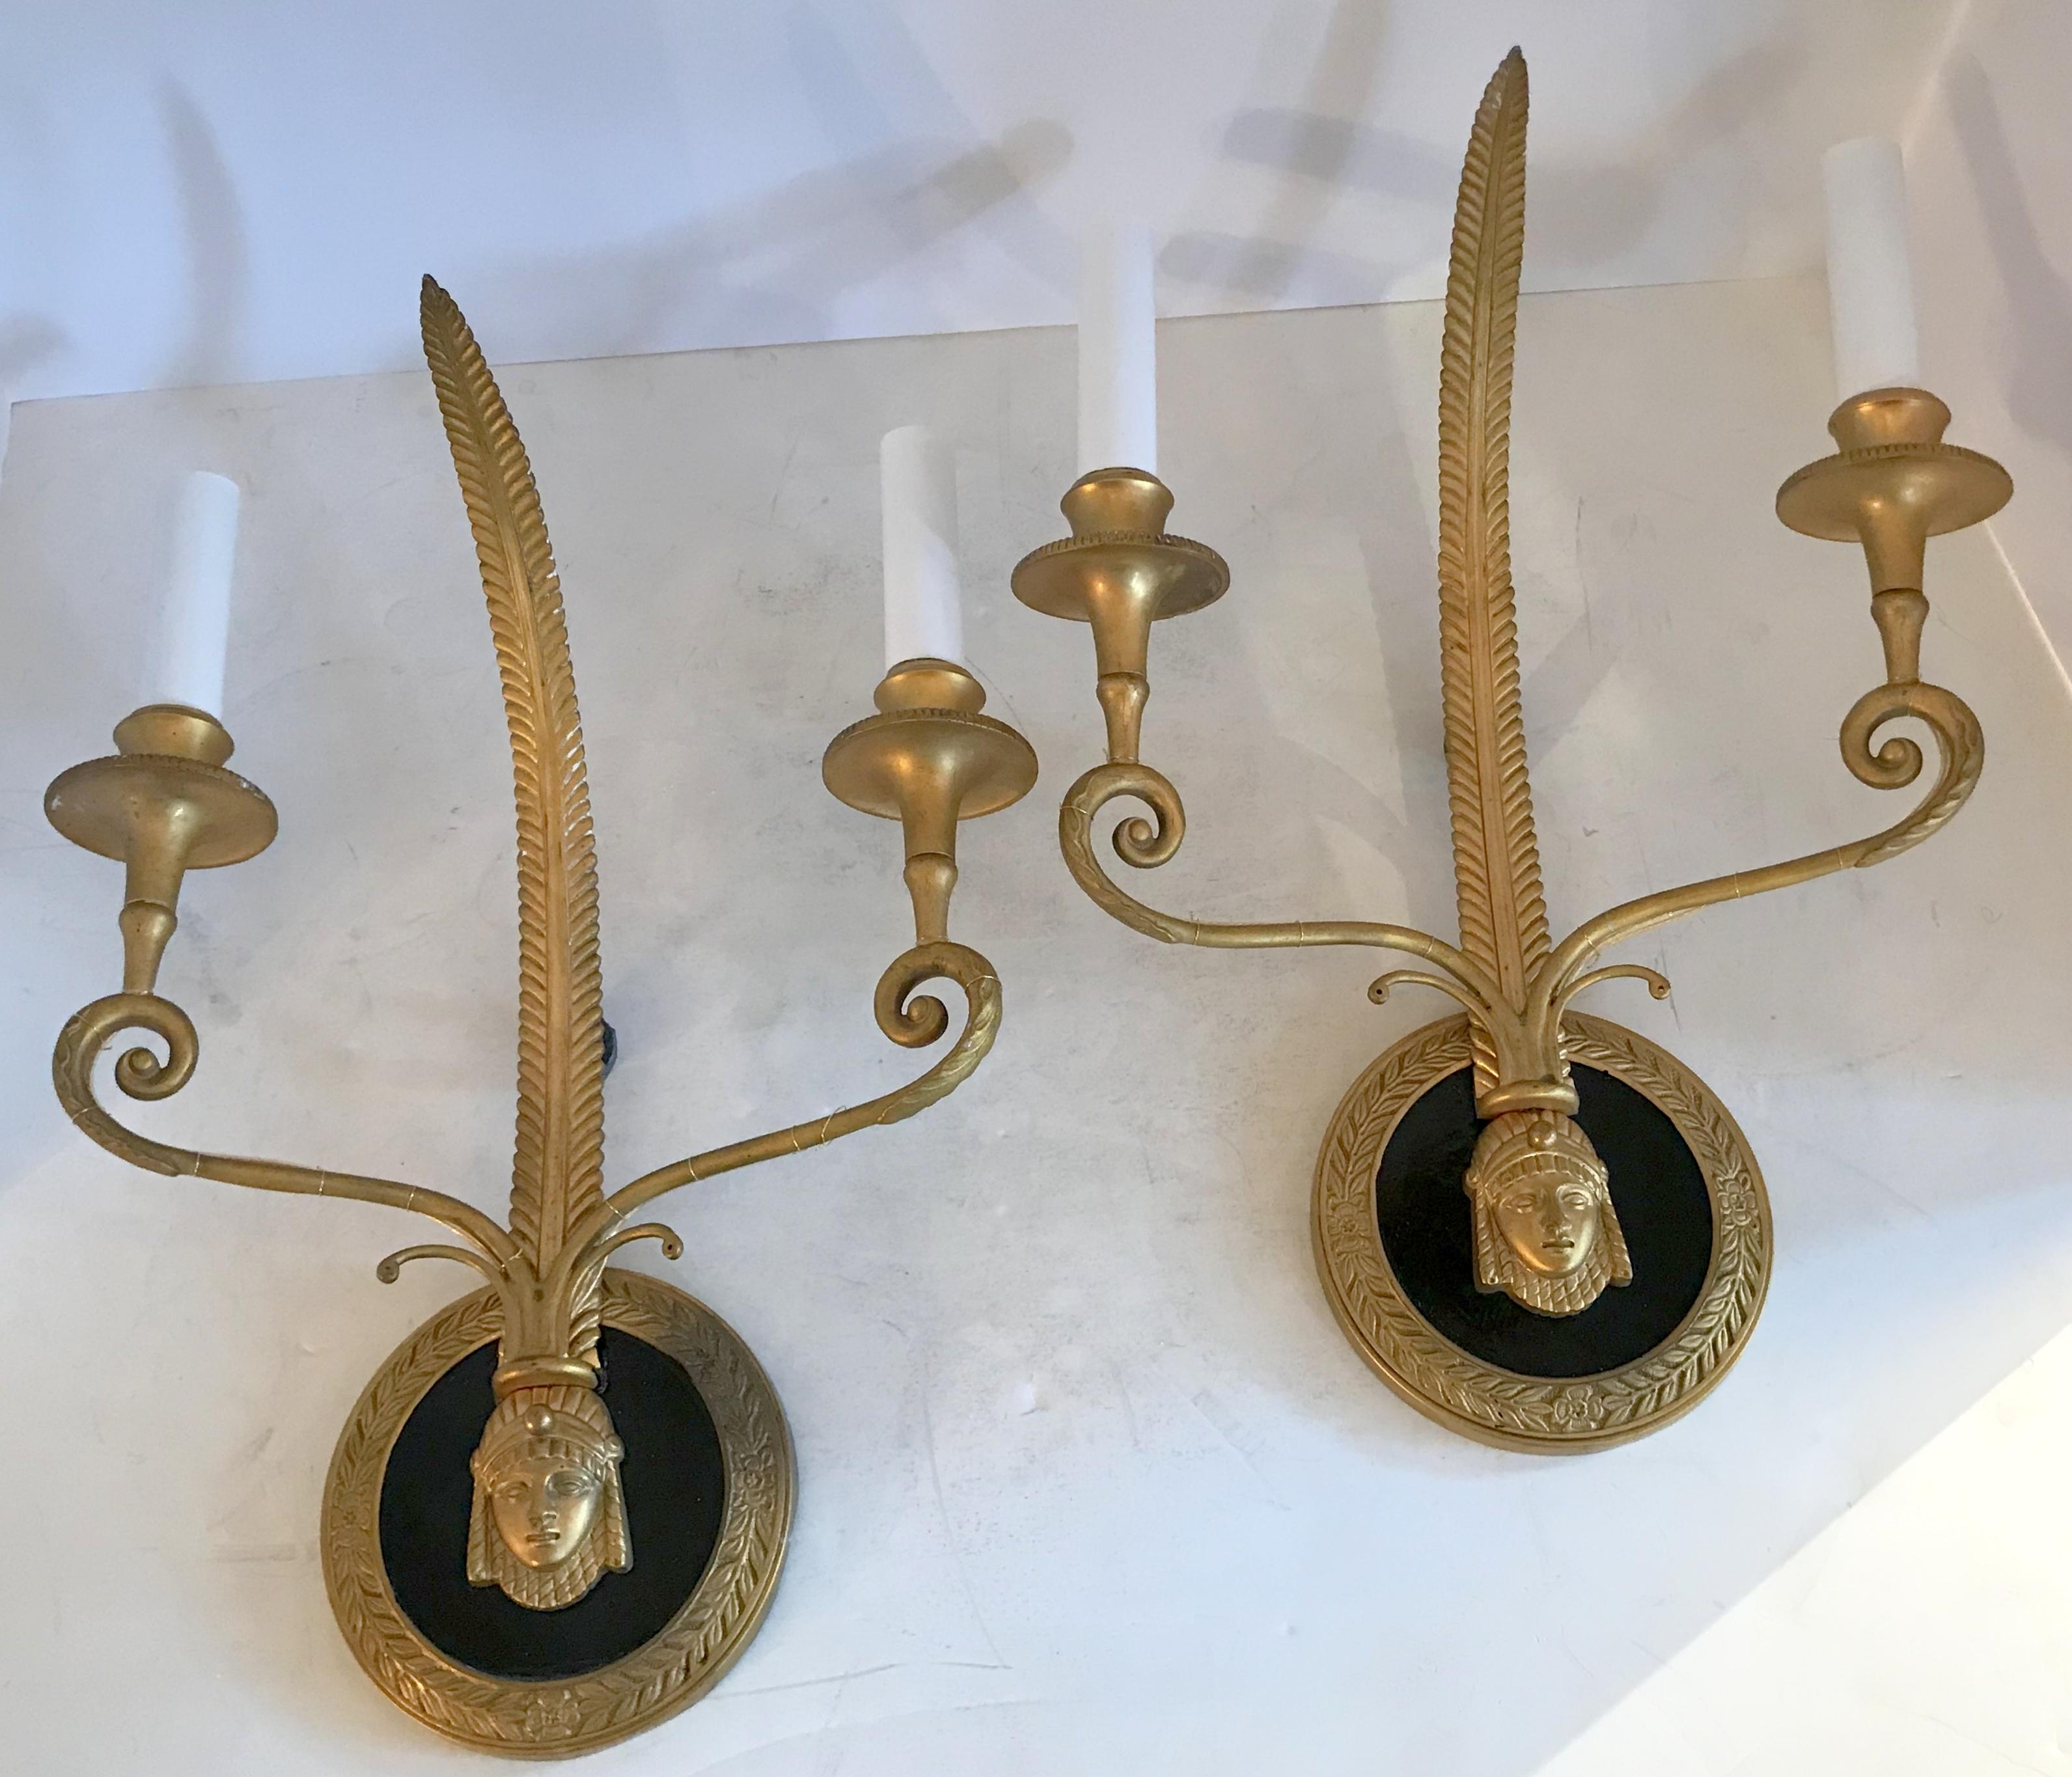 A wonderful pair of French Empire gilt and patinated bronze medusa figure neoclassical sconces.